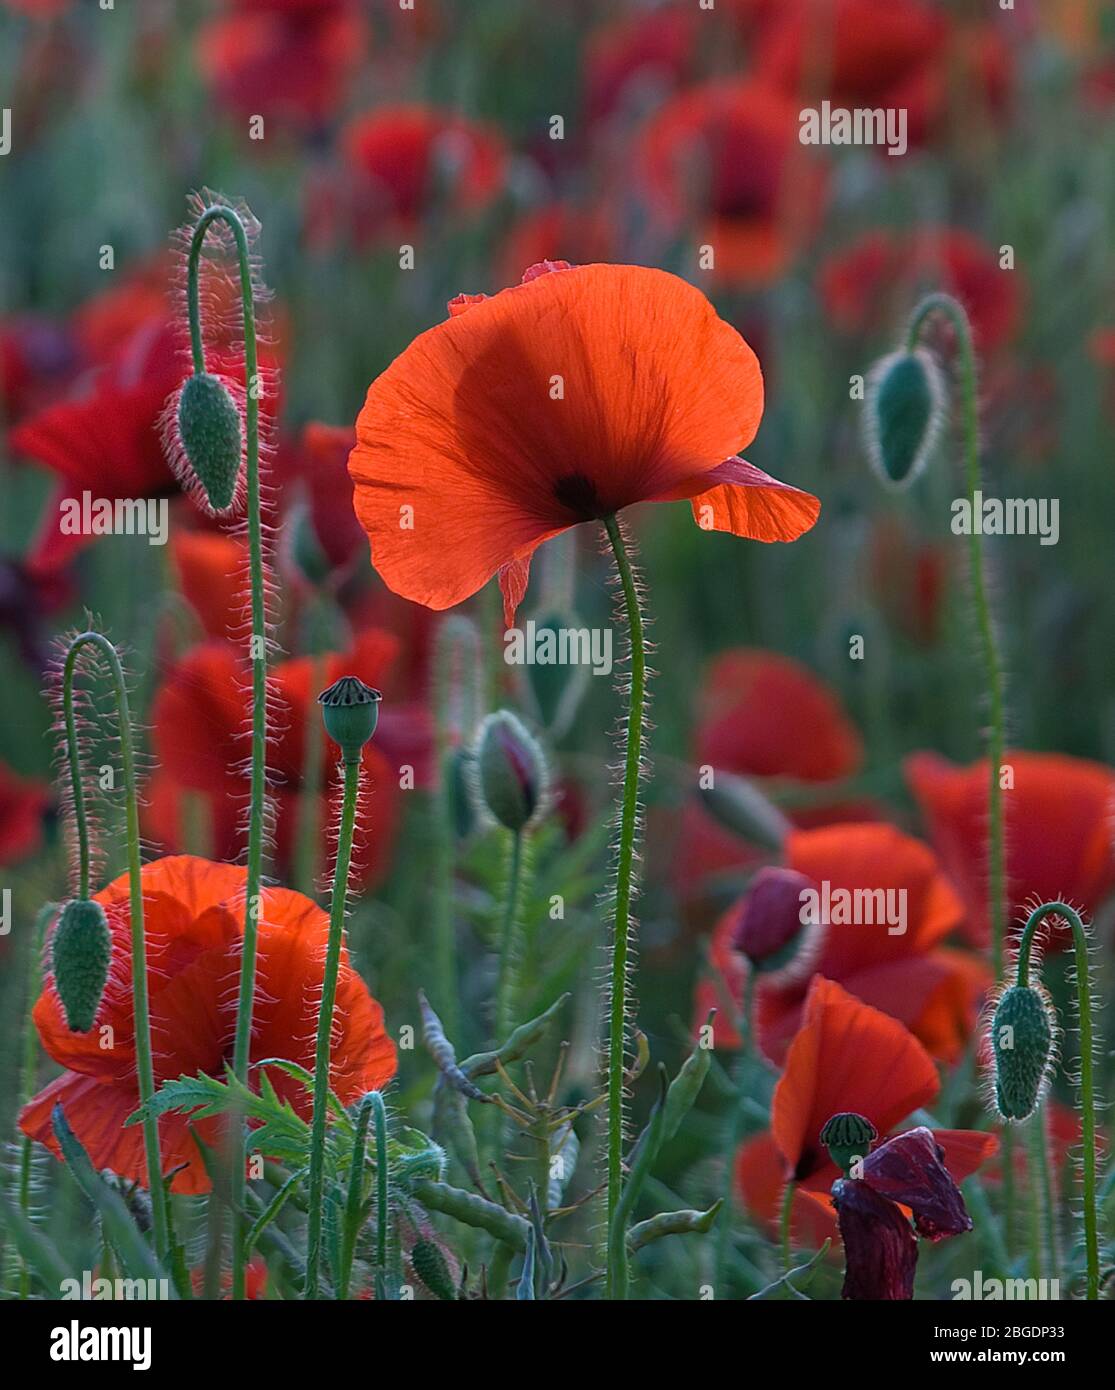 Eye level view in close up of wild poppies with sunlight streaming through and highlighting the scarlet of their papery petals Stock Photo